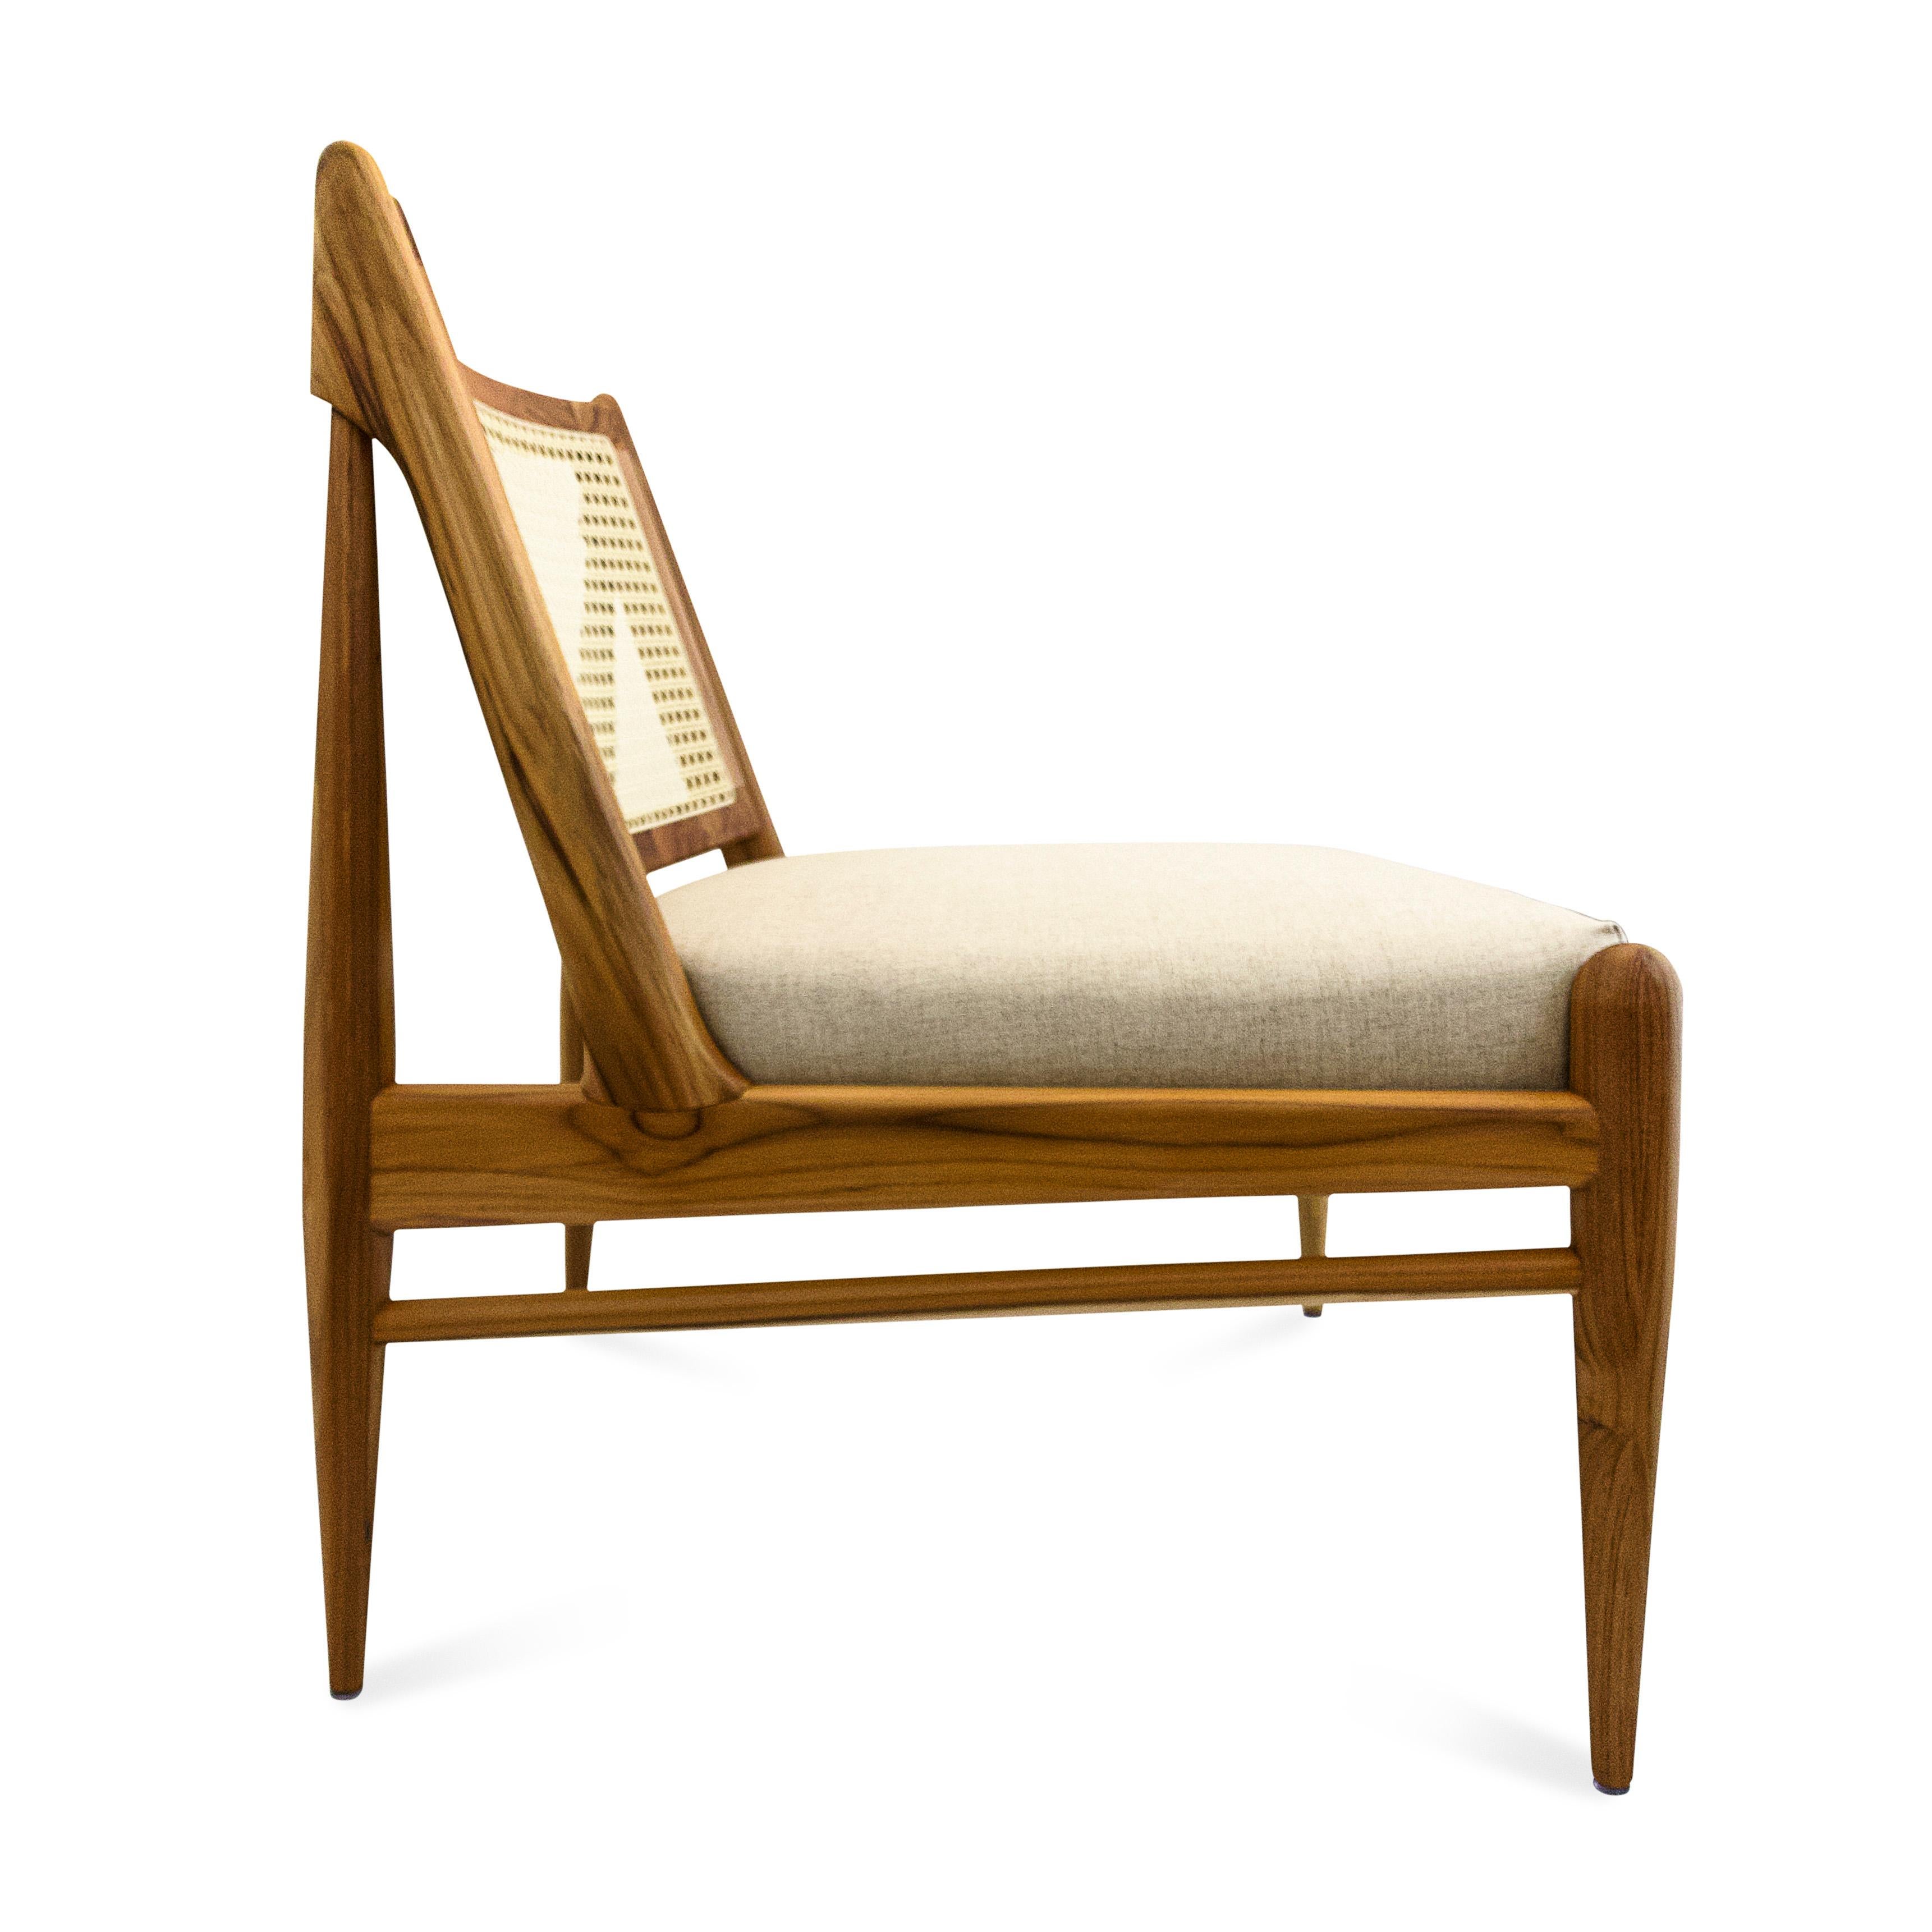 Donna Cane-Back Chair in Teak Wood Finish with Oatmeal Fabric Seat In New Condition For Sale In Miami, FL